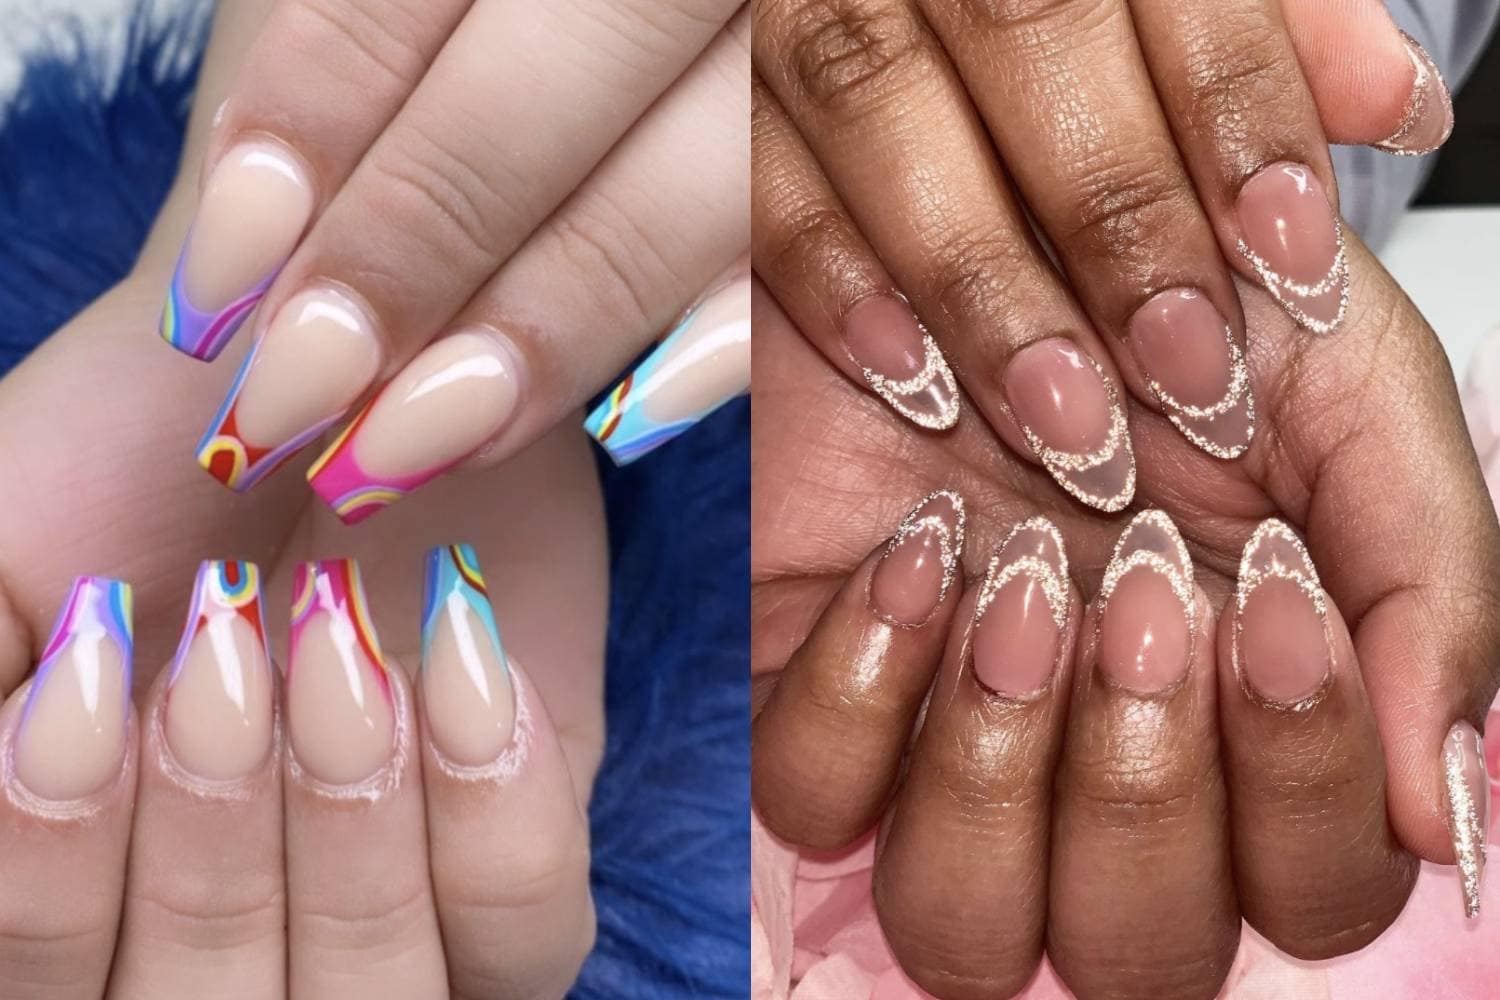 25 French Tip Nails For When The Original Won't Cut It - Let's Eat Cake